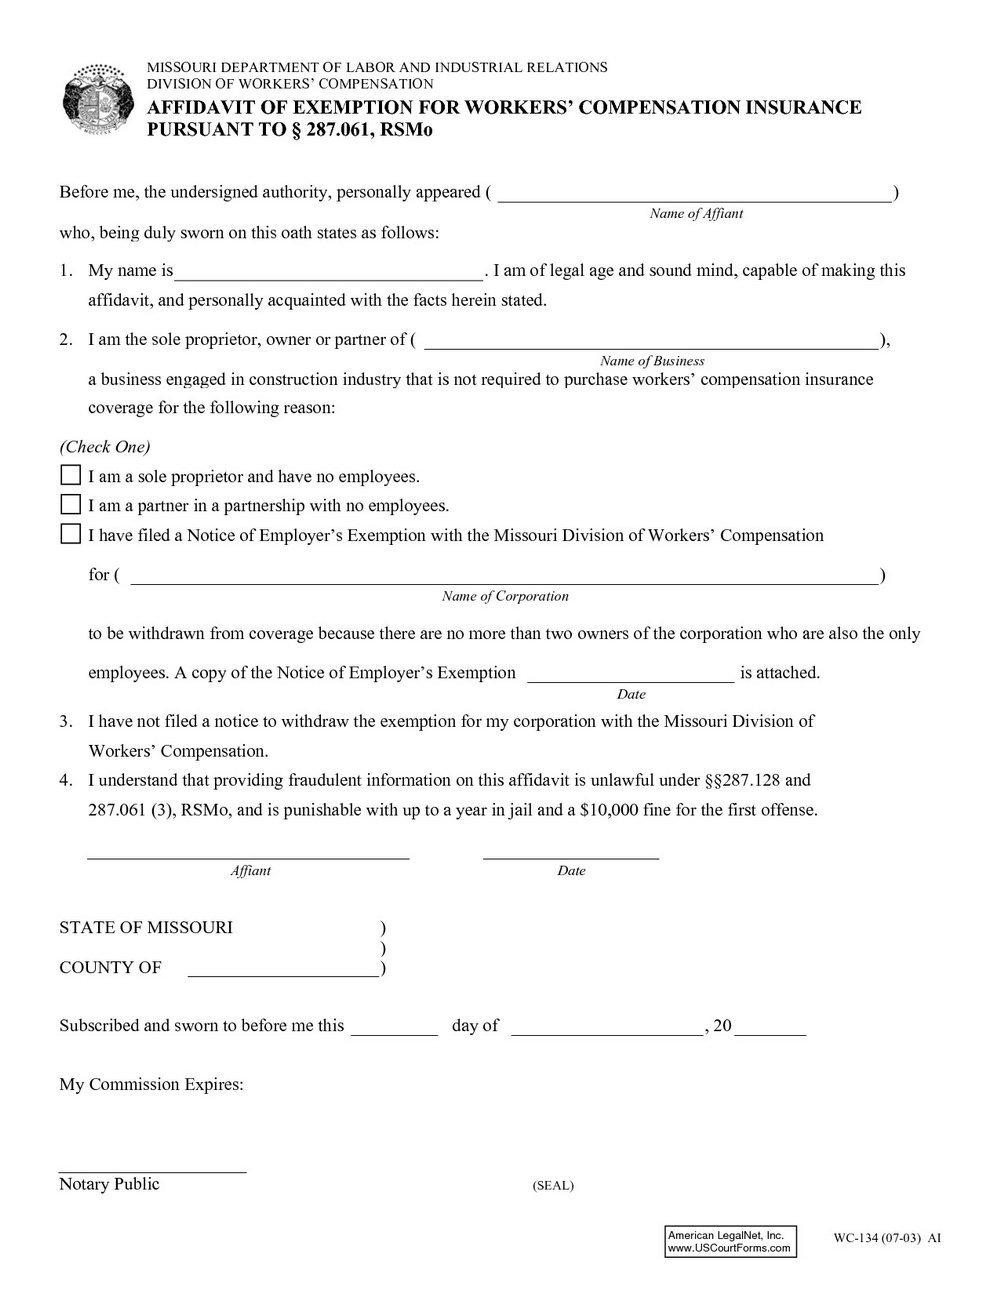 Workers Comp Exemption form Michigan Arizona Workers Pensation Insurance Waiver form Diy